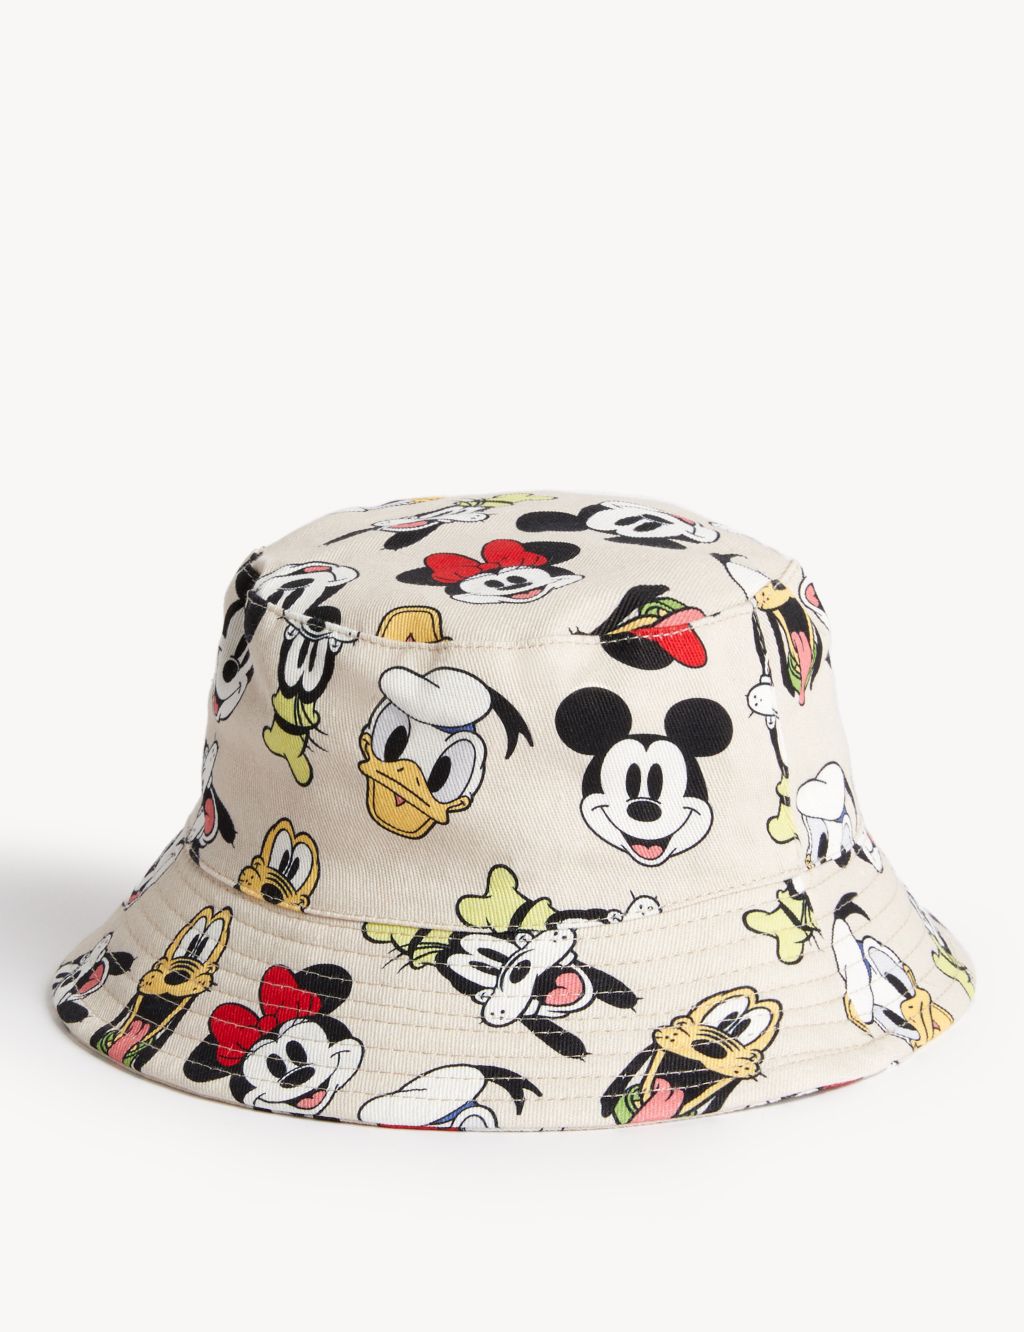 Kids' Pure Cotton Mickey Mouse™ Sun Hat (12 Mths - 6 Yrs) image 2